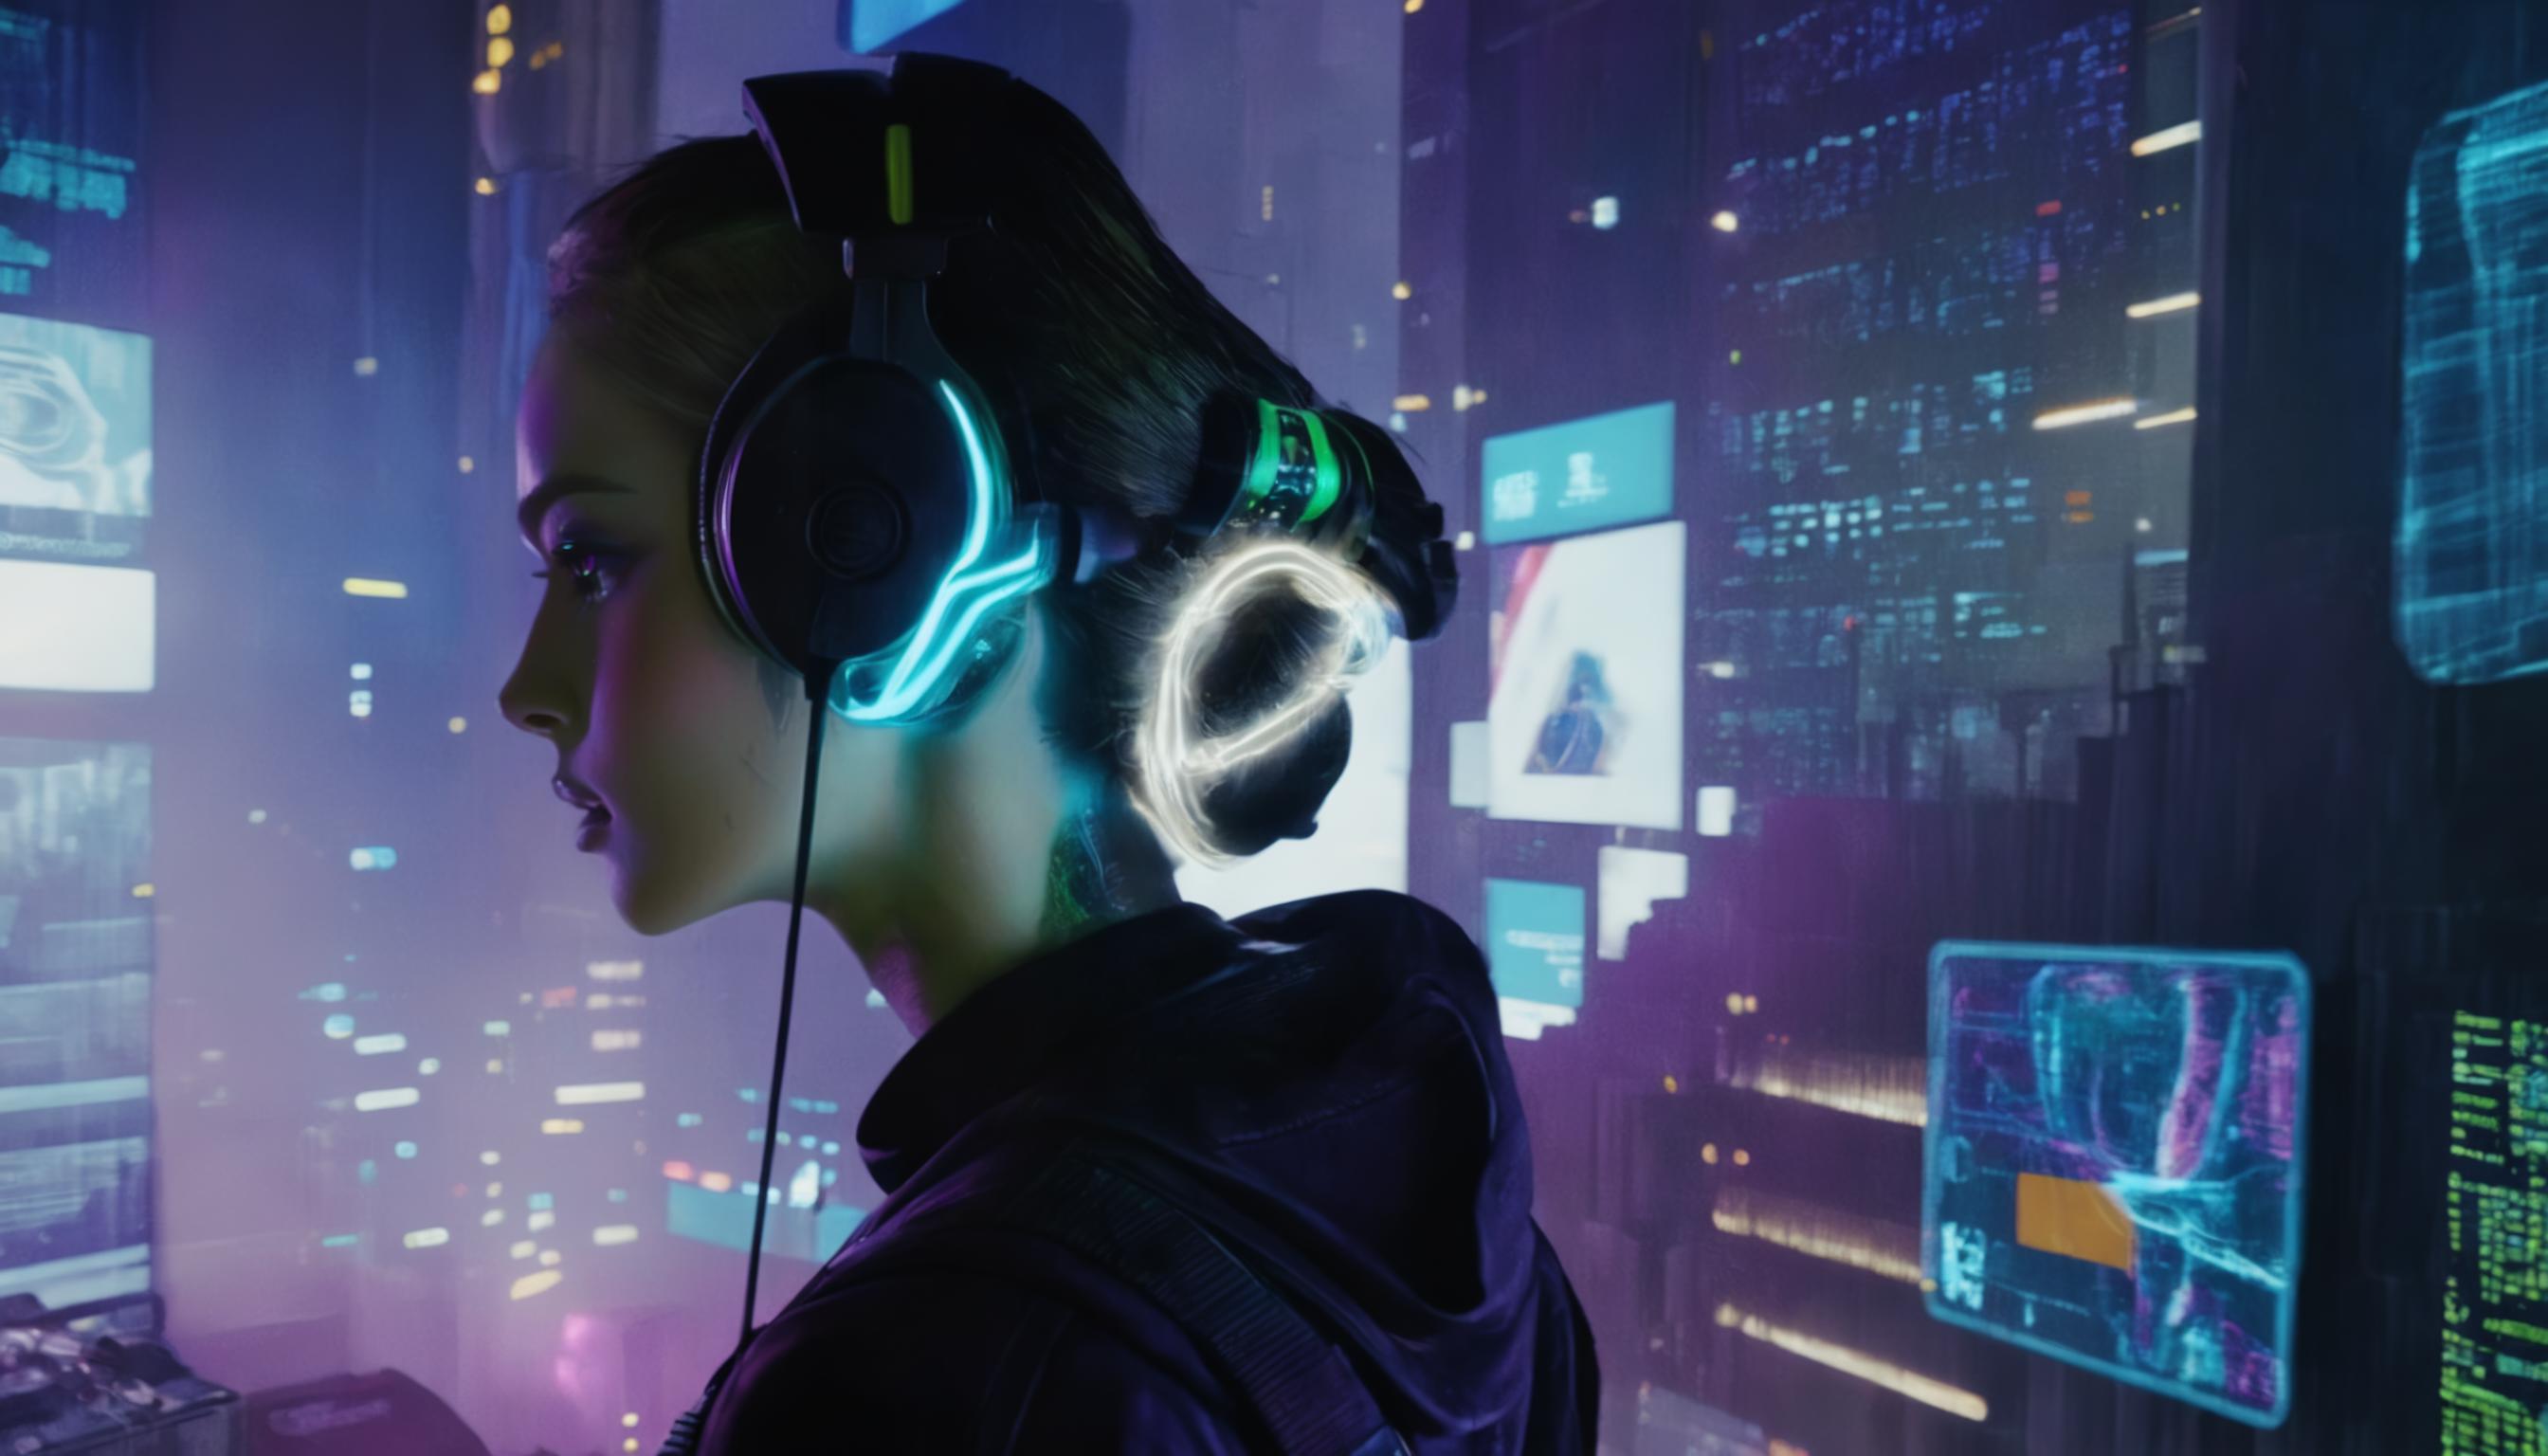 A woman wearing headphones and a backpack, standing in front of a futuristic cityscape.